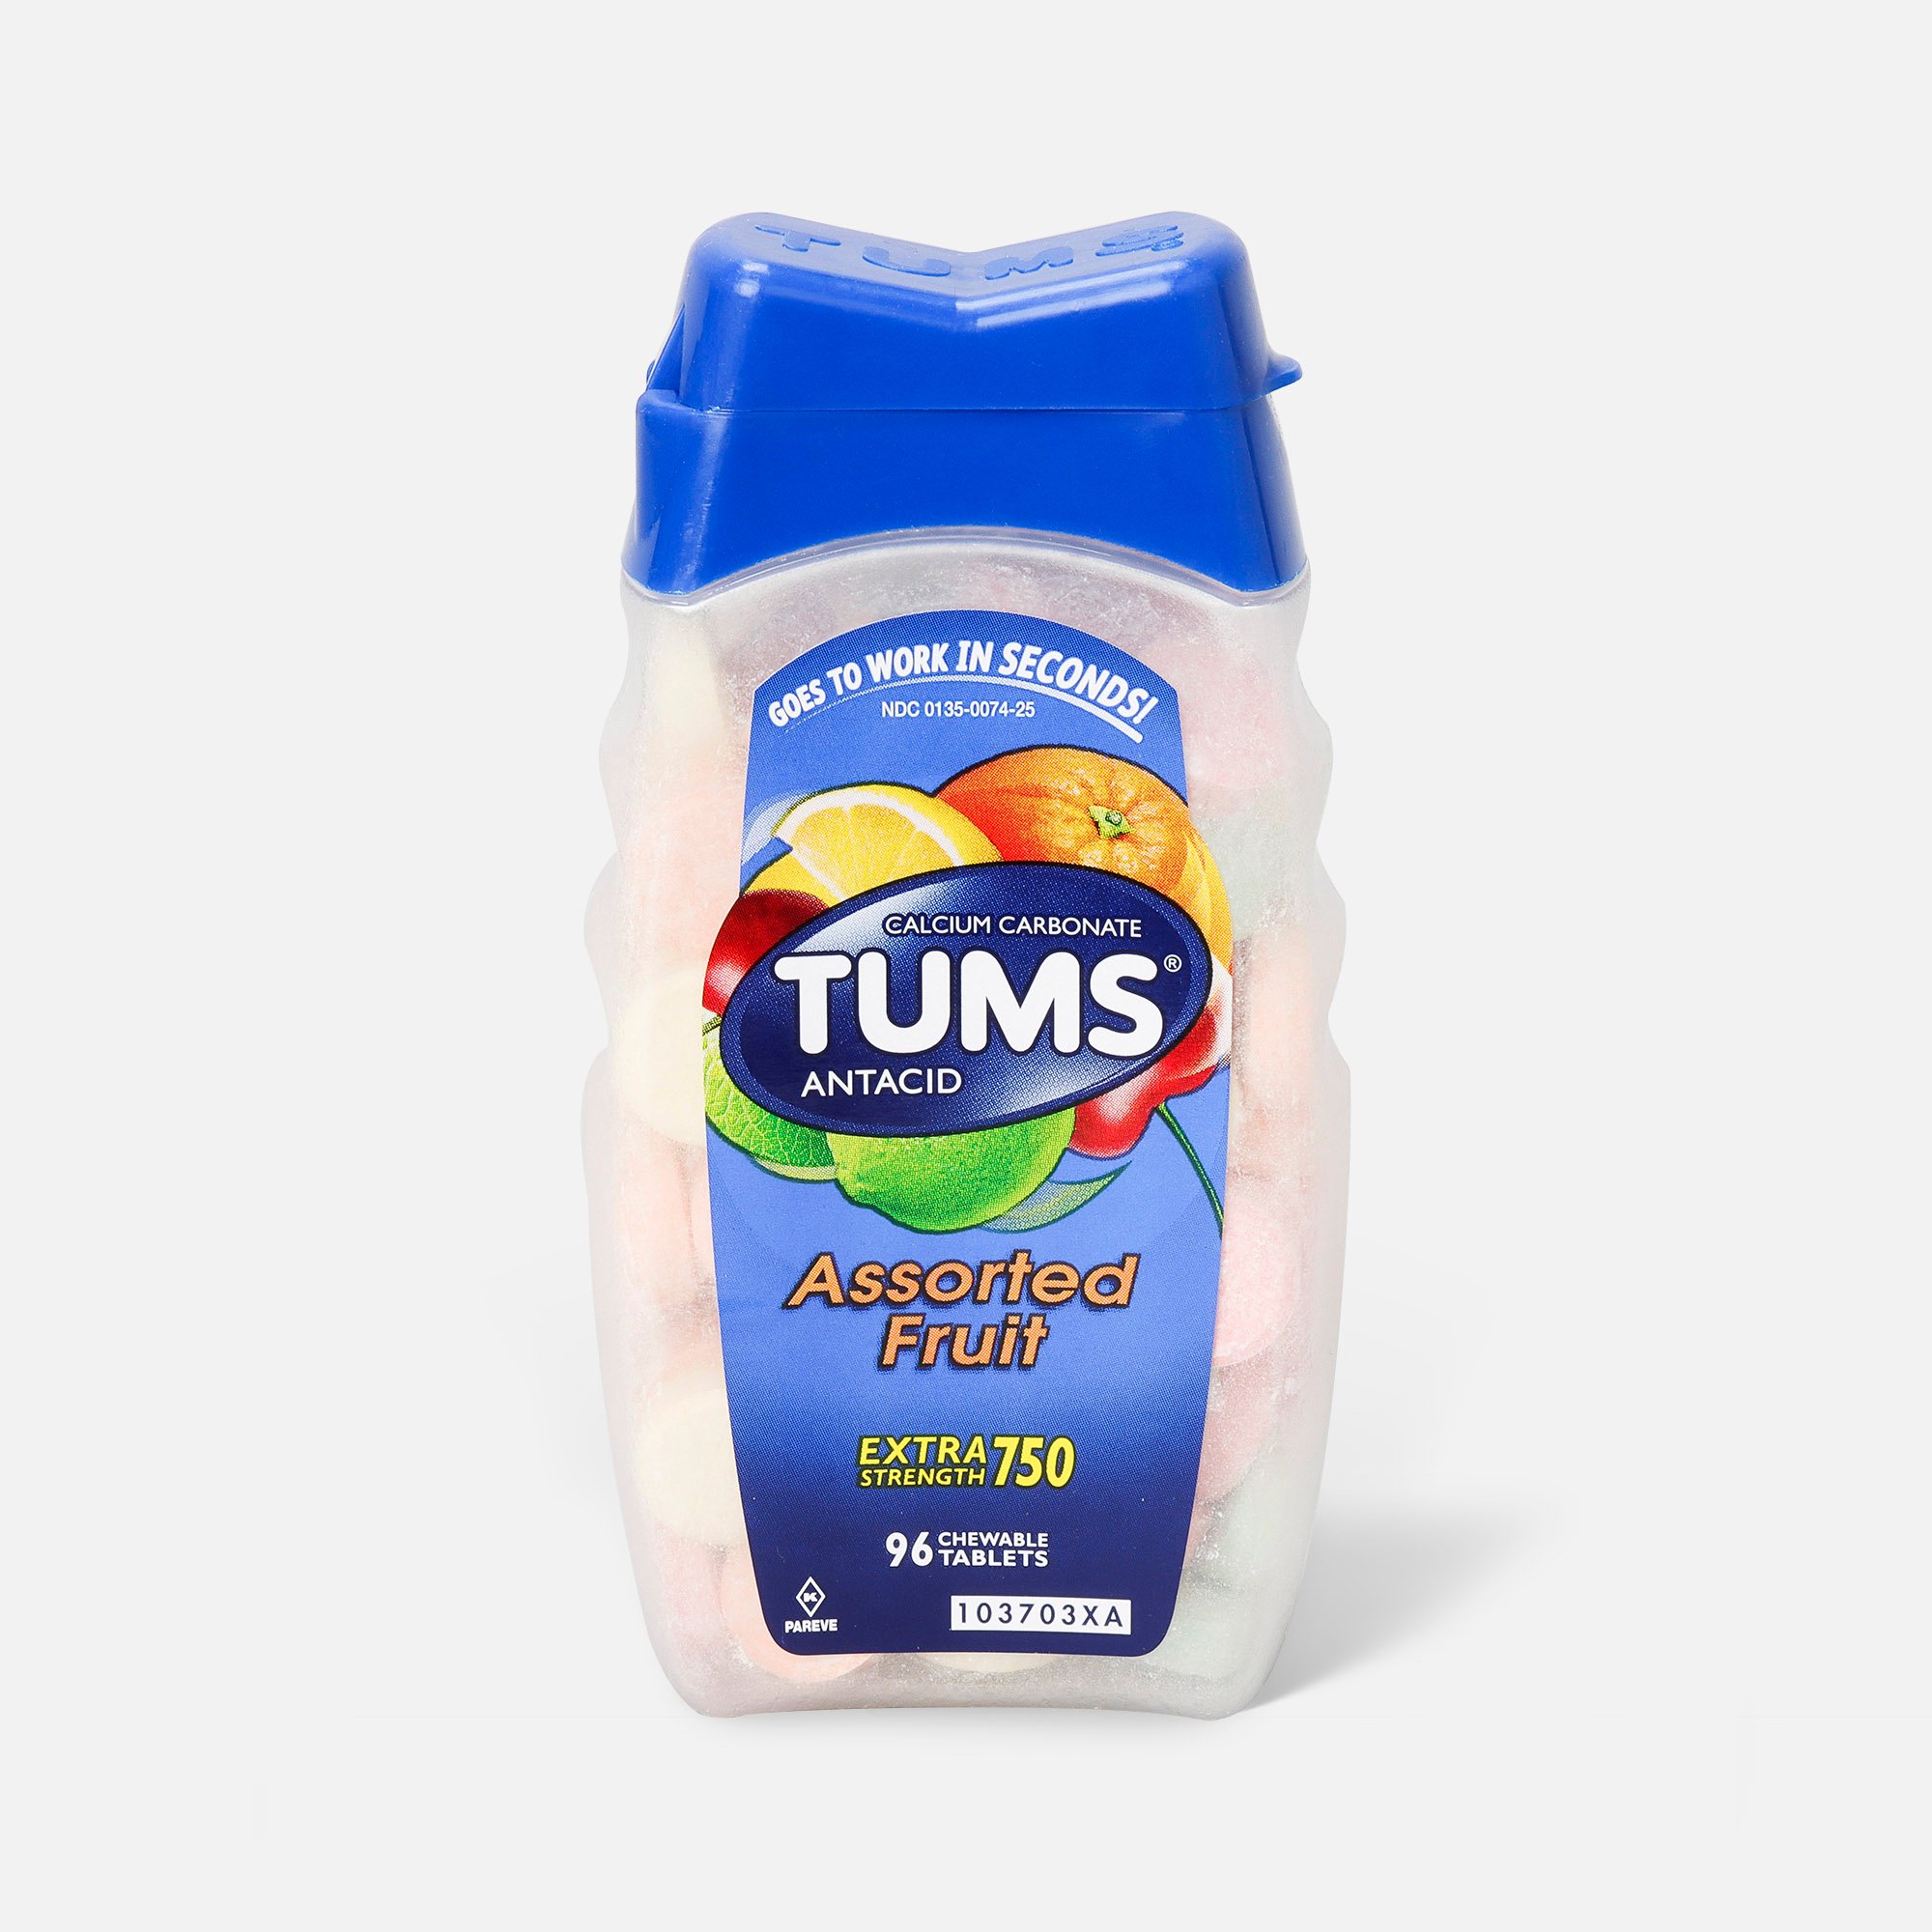 FSA Eligible | TUMS Extra Strength Assorted Fruit Antacid Chewable Tablets  for Heartburn Relief, 96 ct.